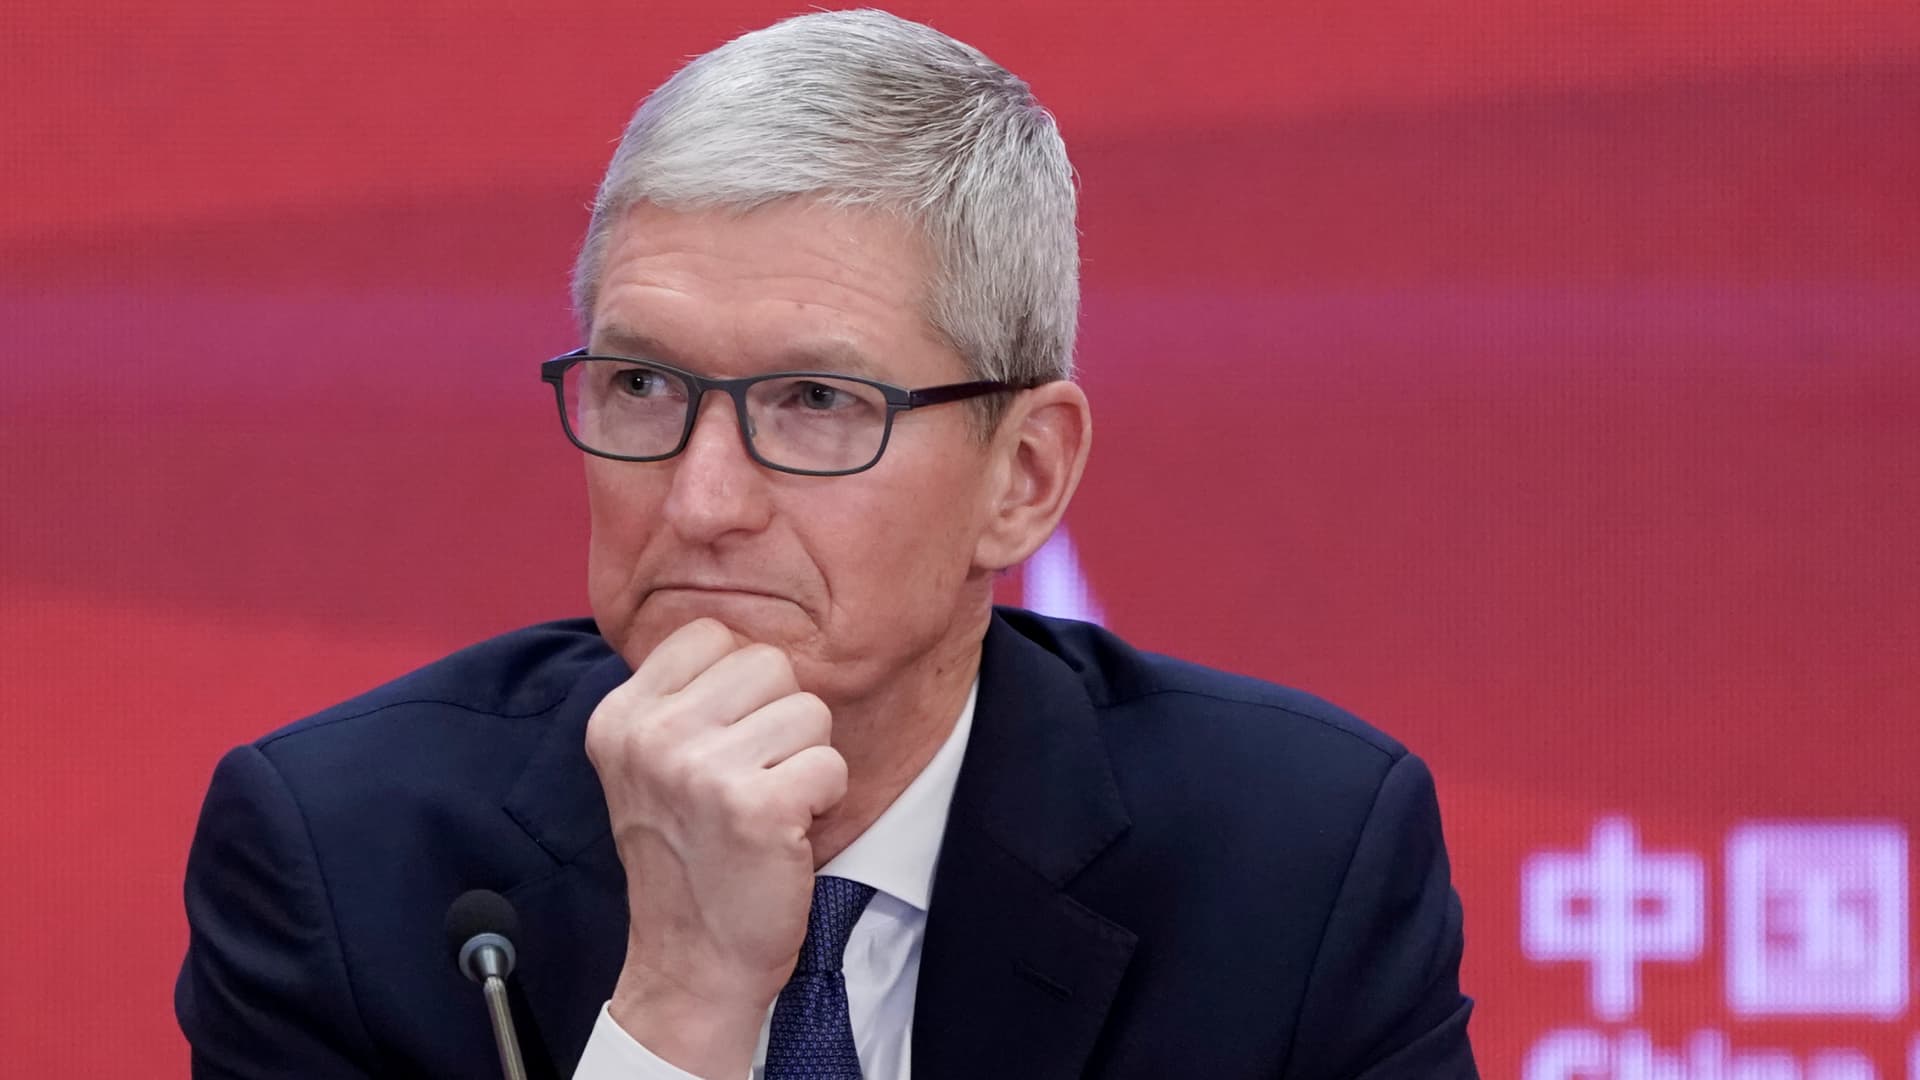 Apple shares fall after reports that China banned iPhone use by government employees